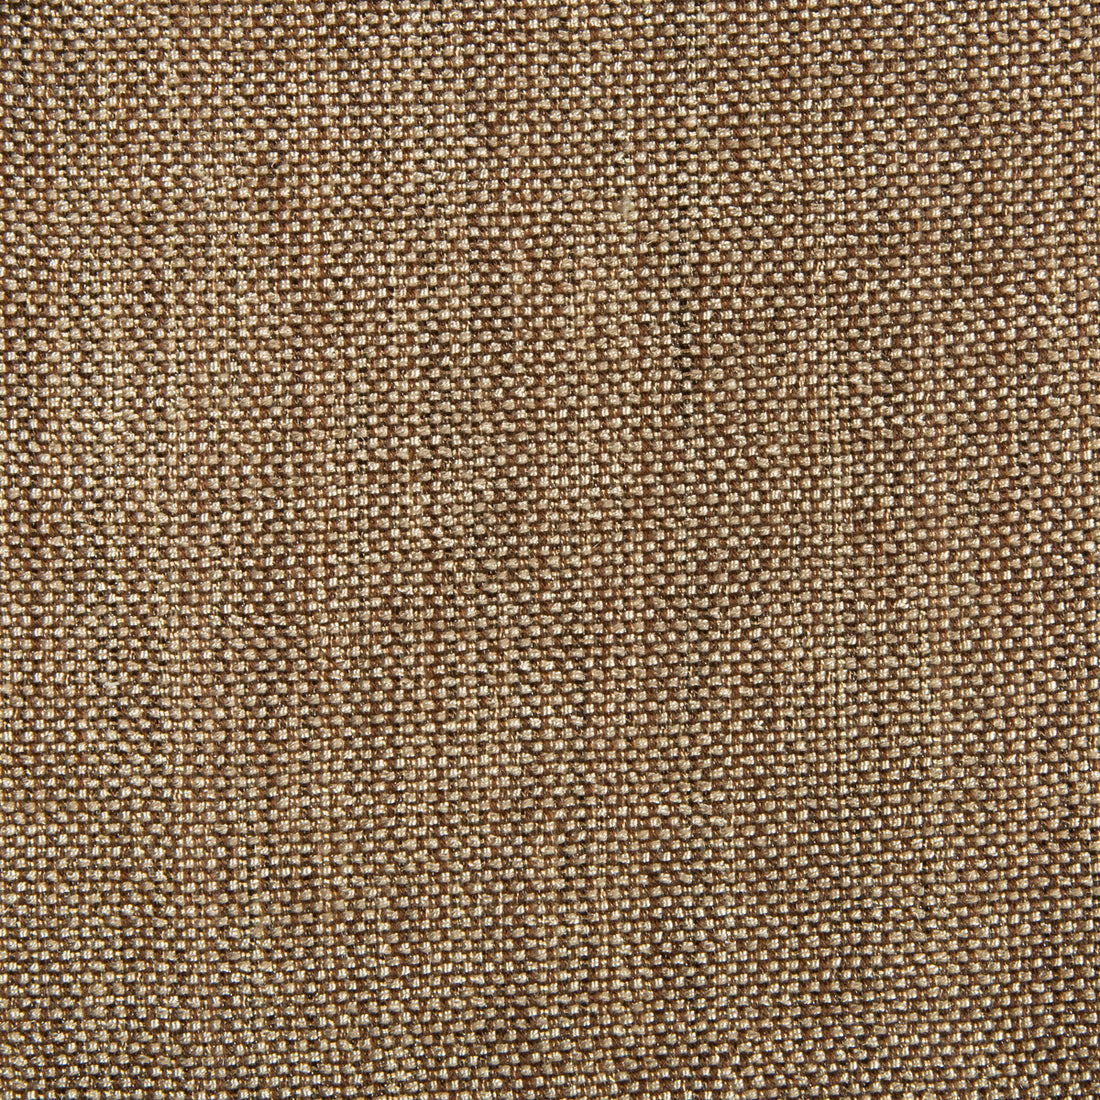 Kravet Contract fabric in 34926-606 color - pattern 34926.606.0 - by Kravet Contract